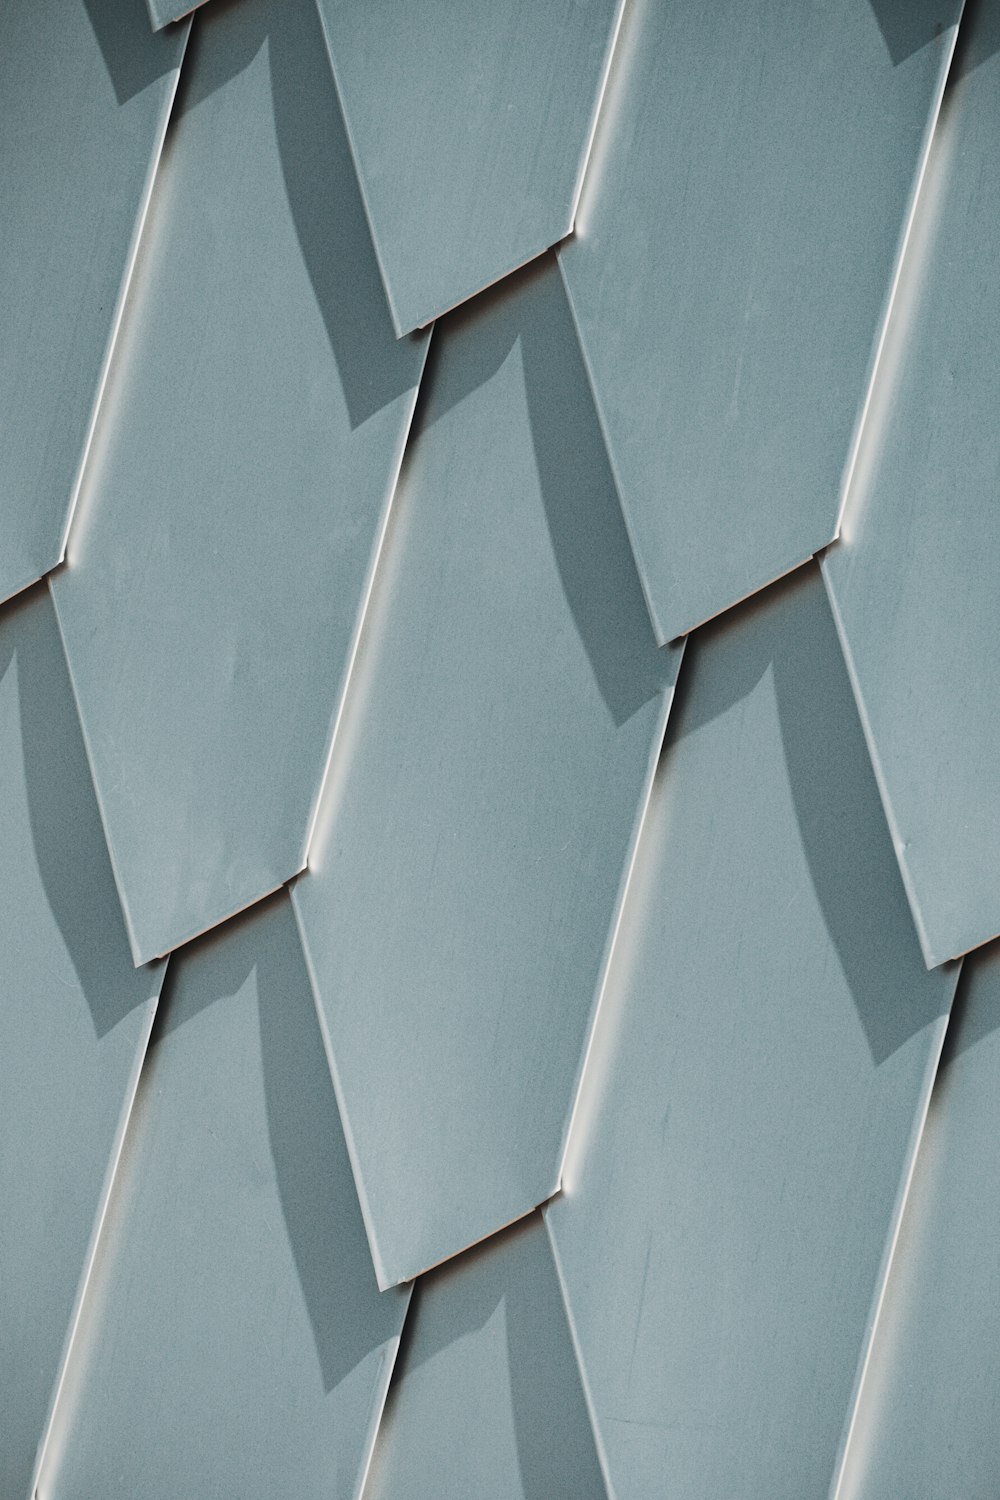 a close up of a building with hexagonal tiles